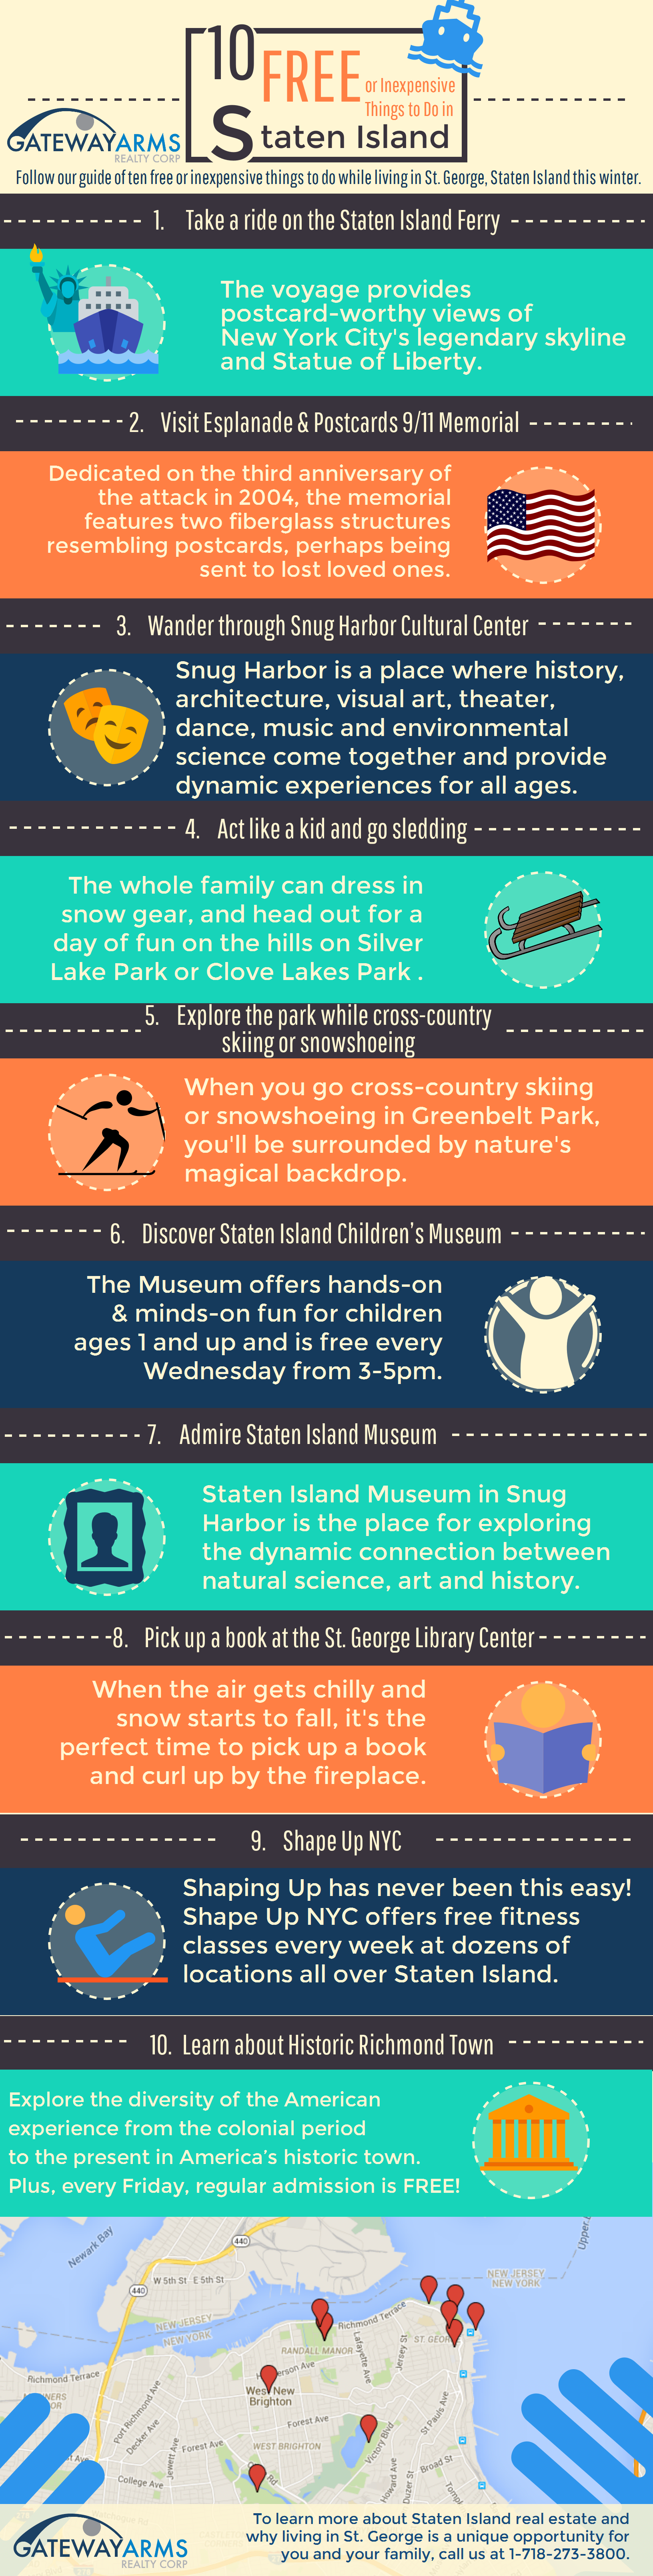 10 Free or Inexpensive Things To Do While Living in St. George Staten Island